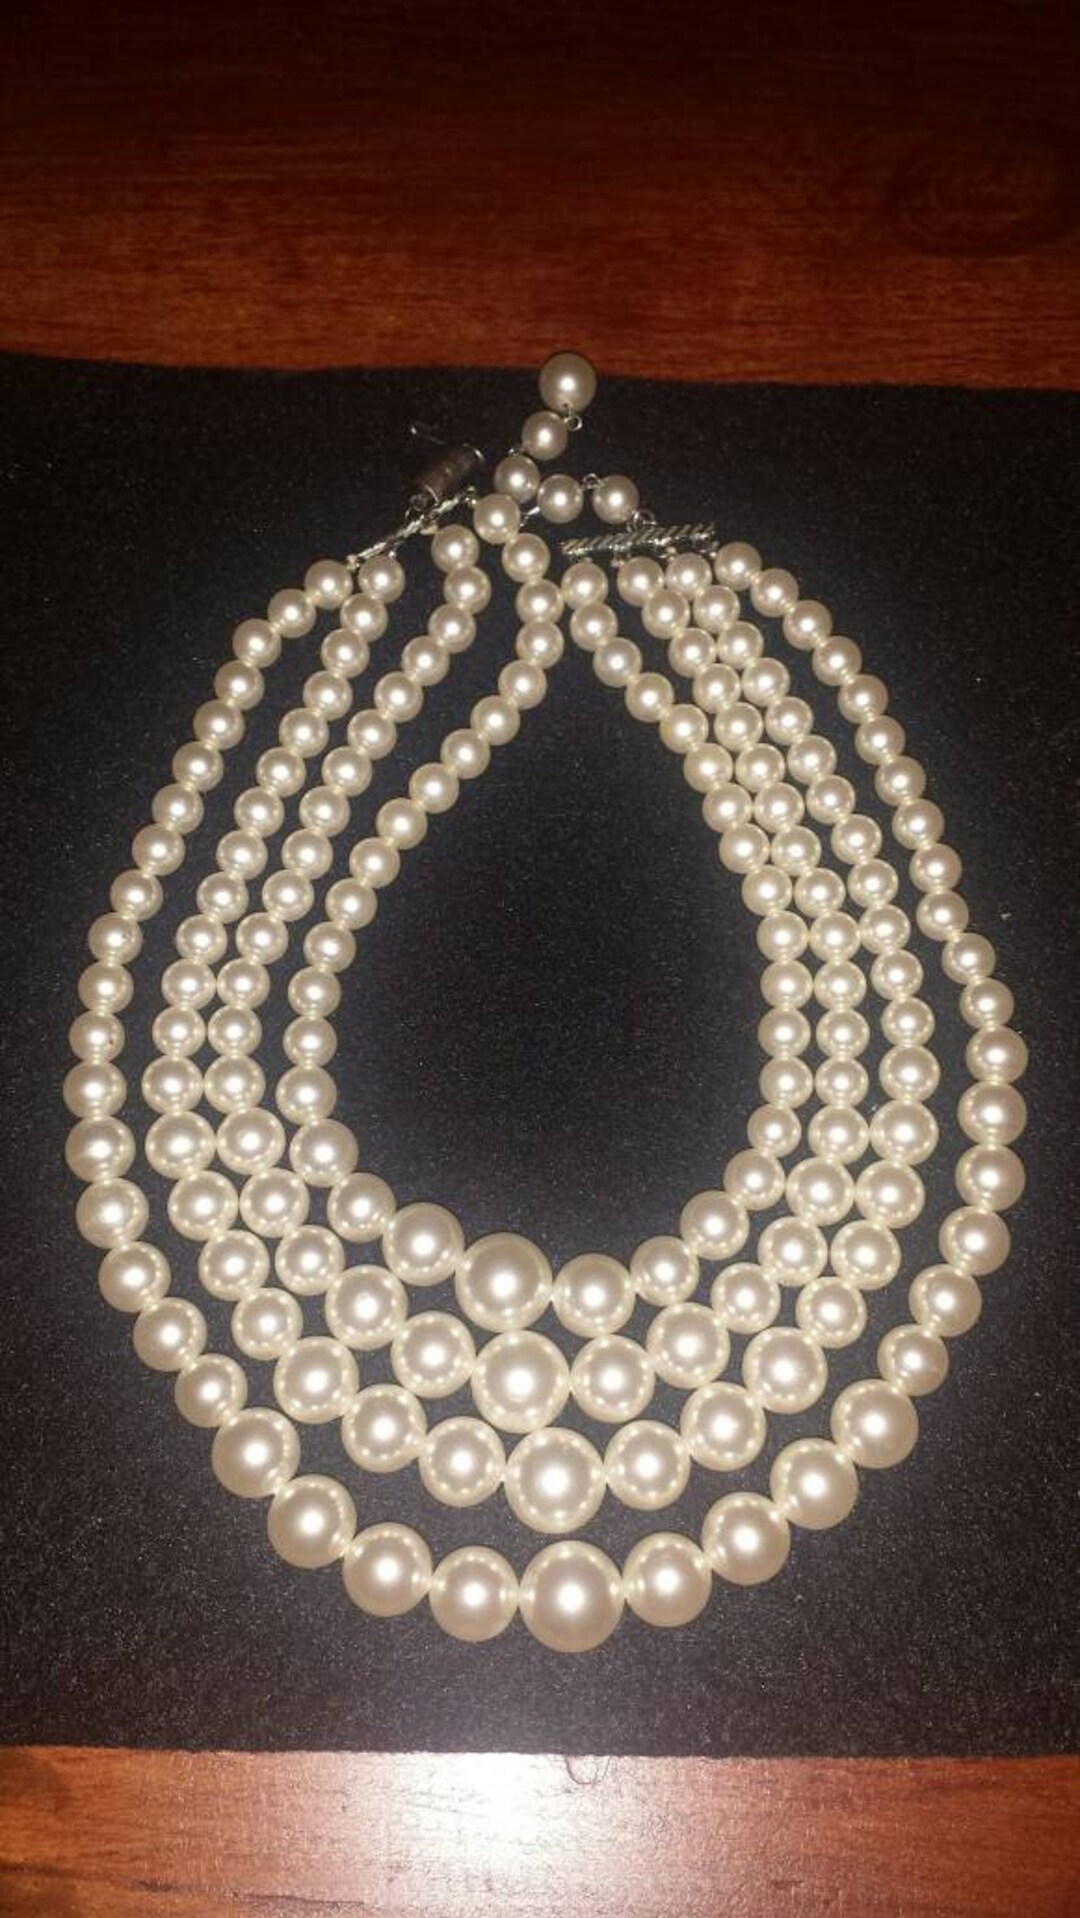 Vintage Strand of Faux Pearls, Long Pearl Necklace Strand Measures